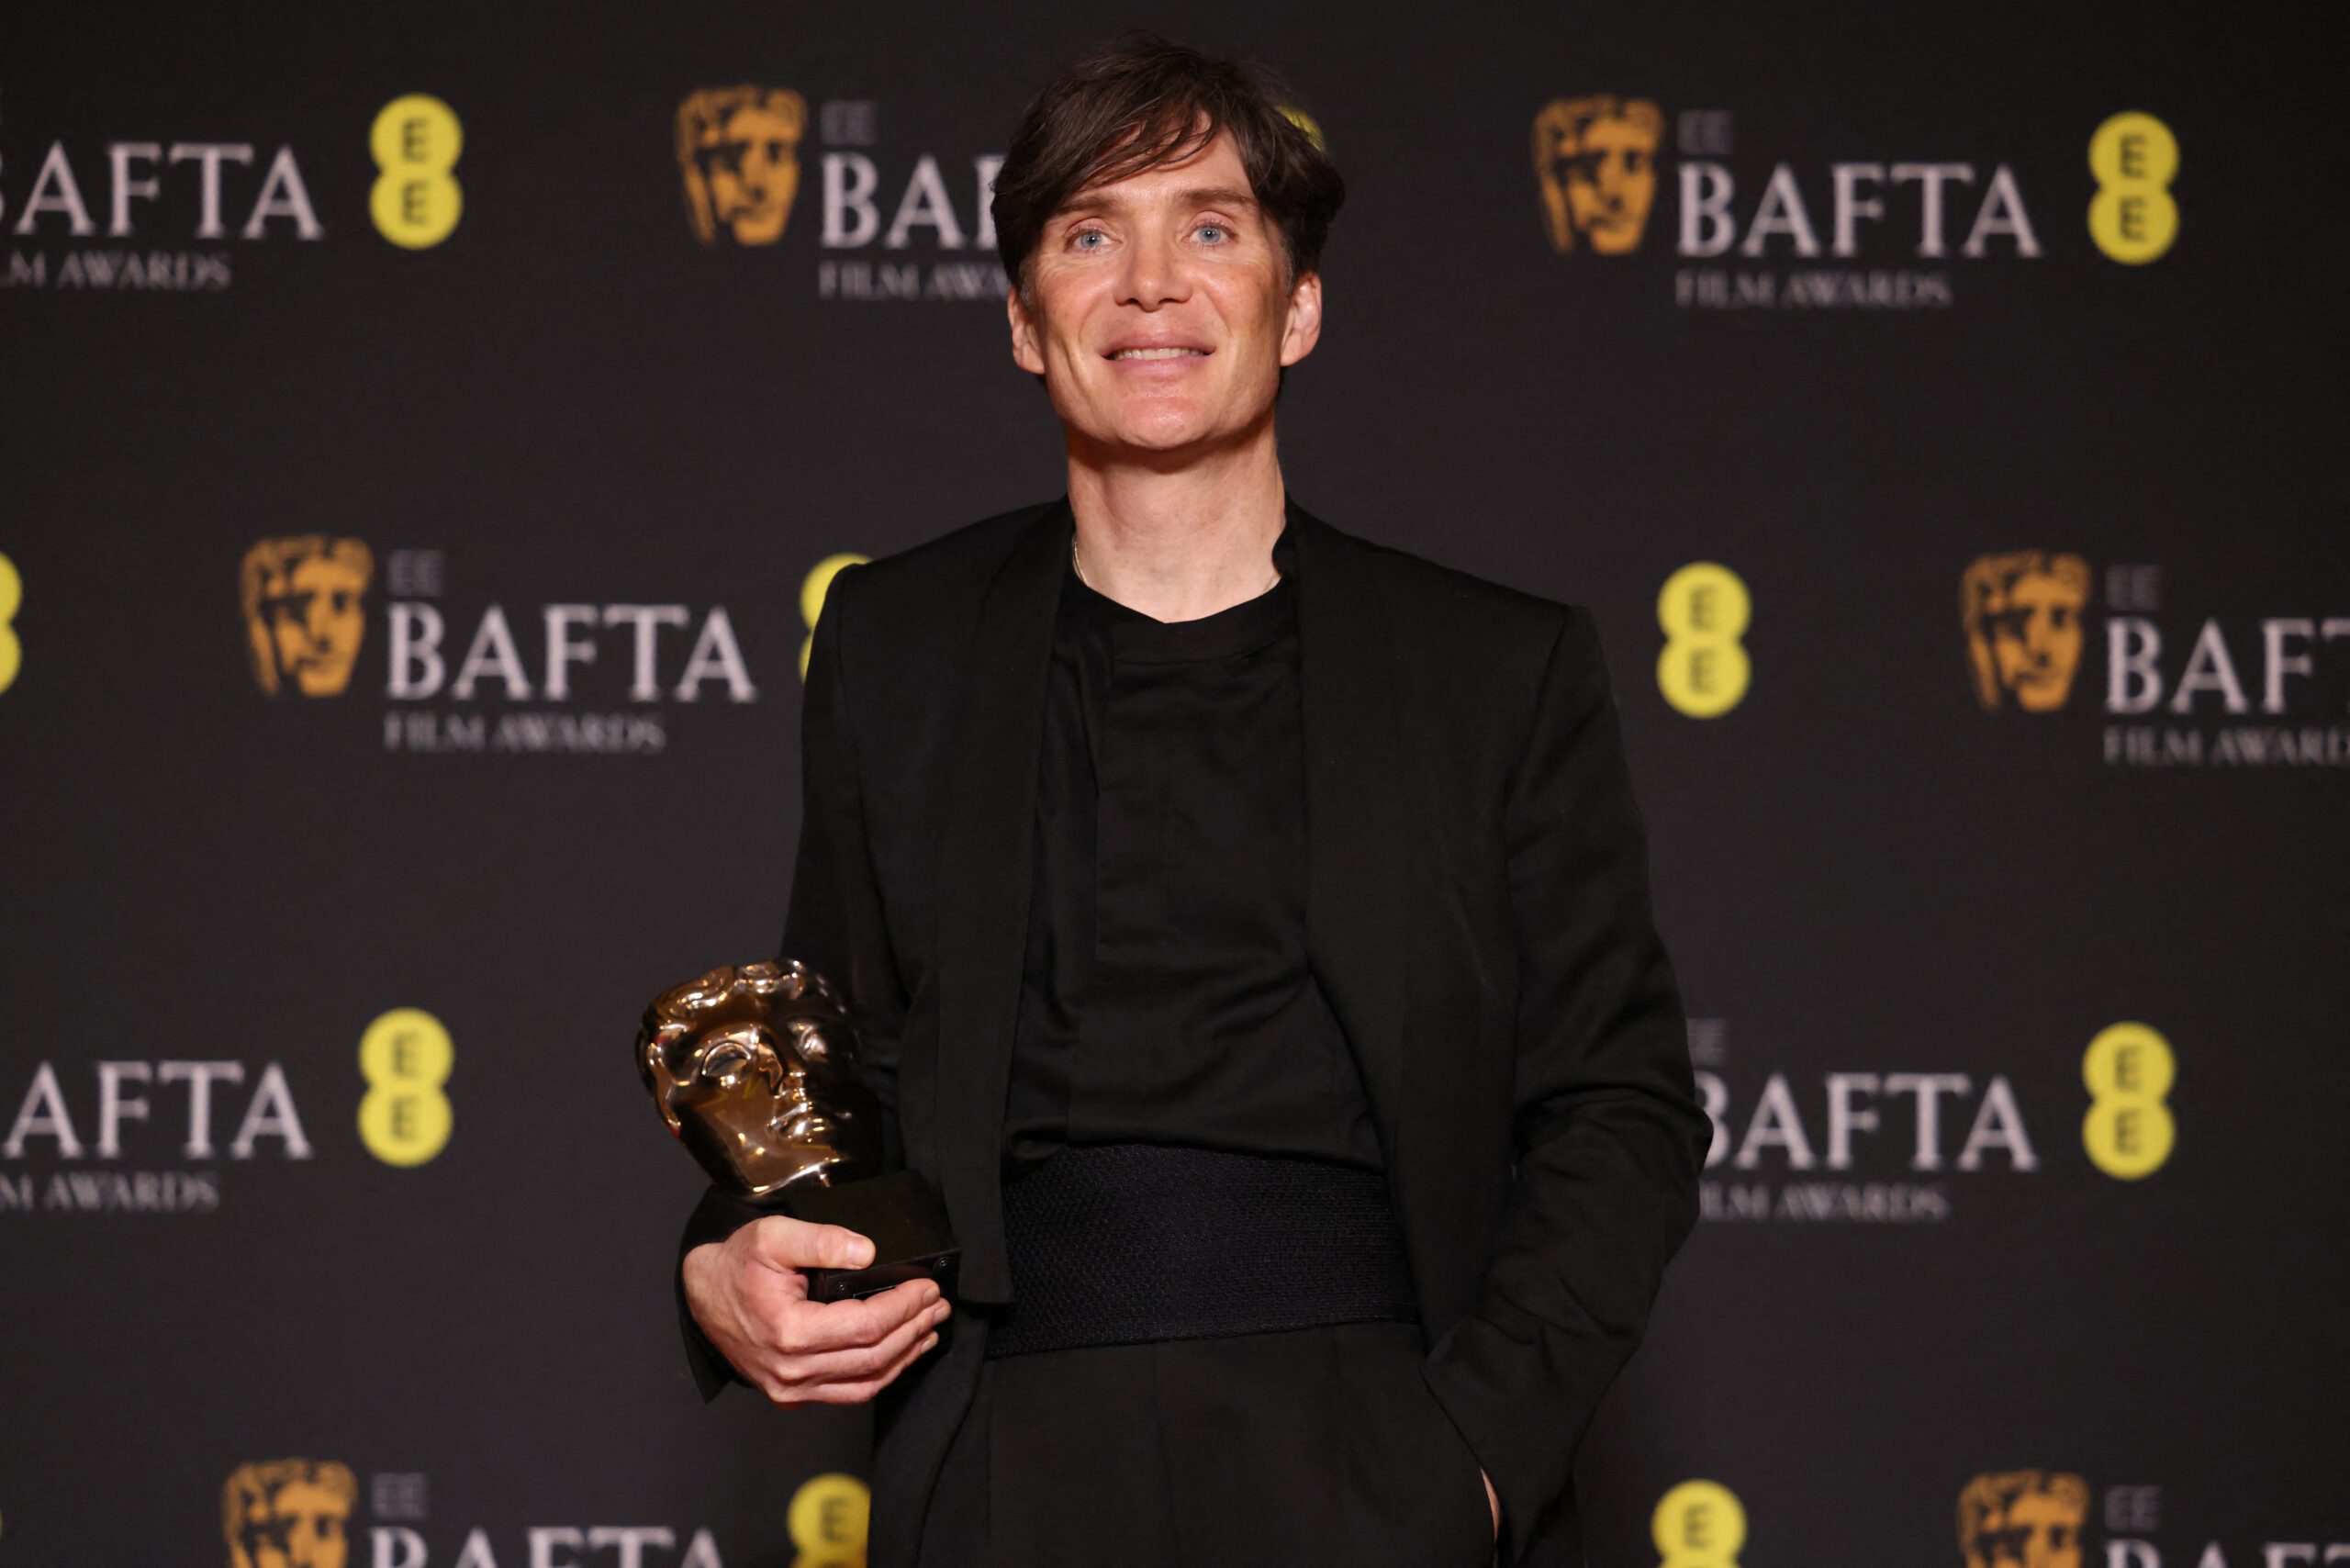 ‘Oppenheimer’ triumphs at BAFTA Film Awards with most win